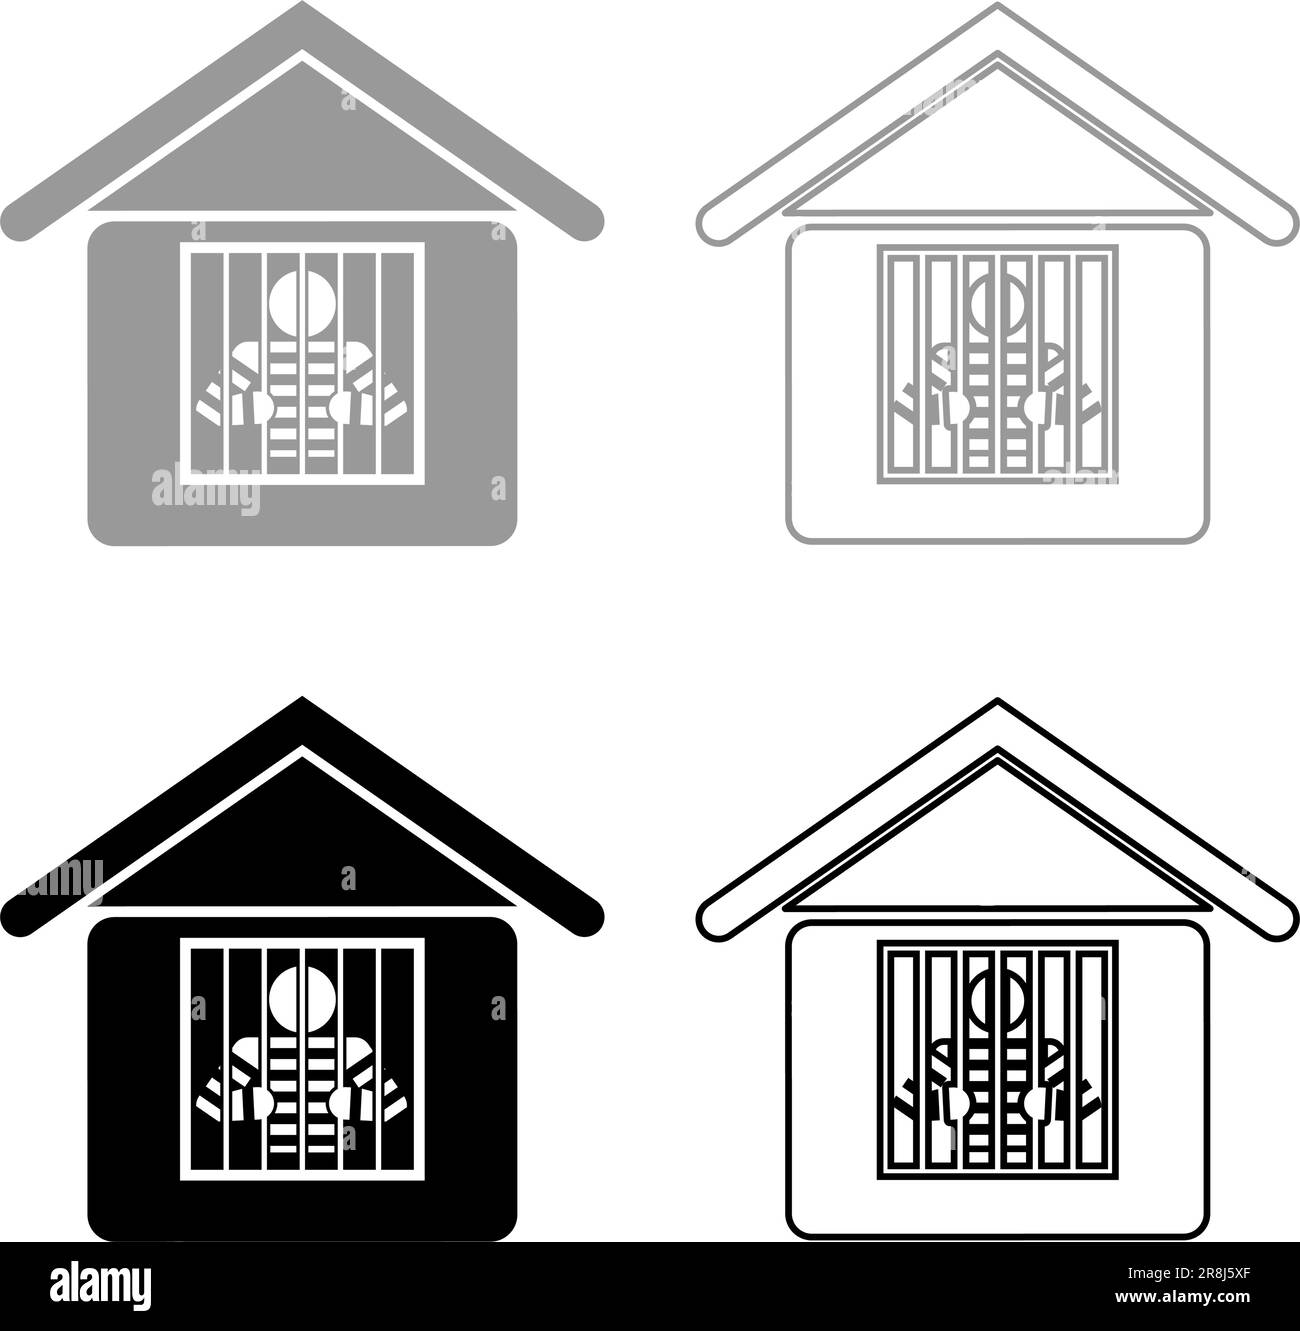 Prisoner in prison building set icon grey black color vector illustration image simple solid fill outline contour line thin flat style Stock Vector